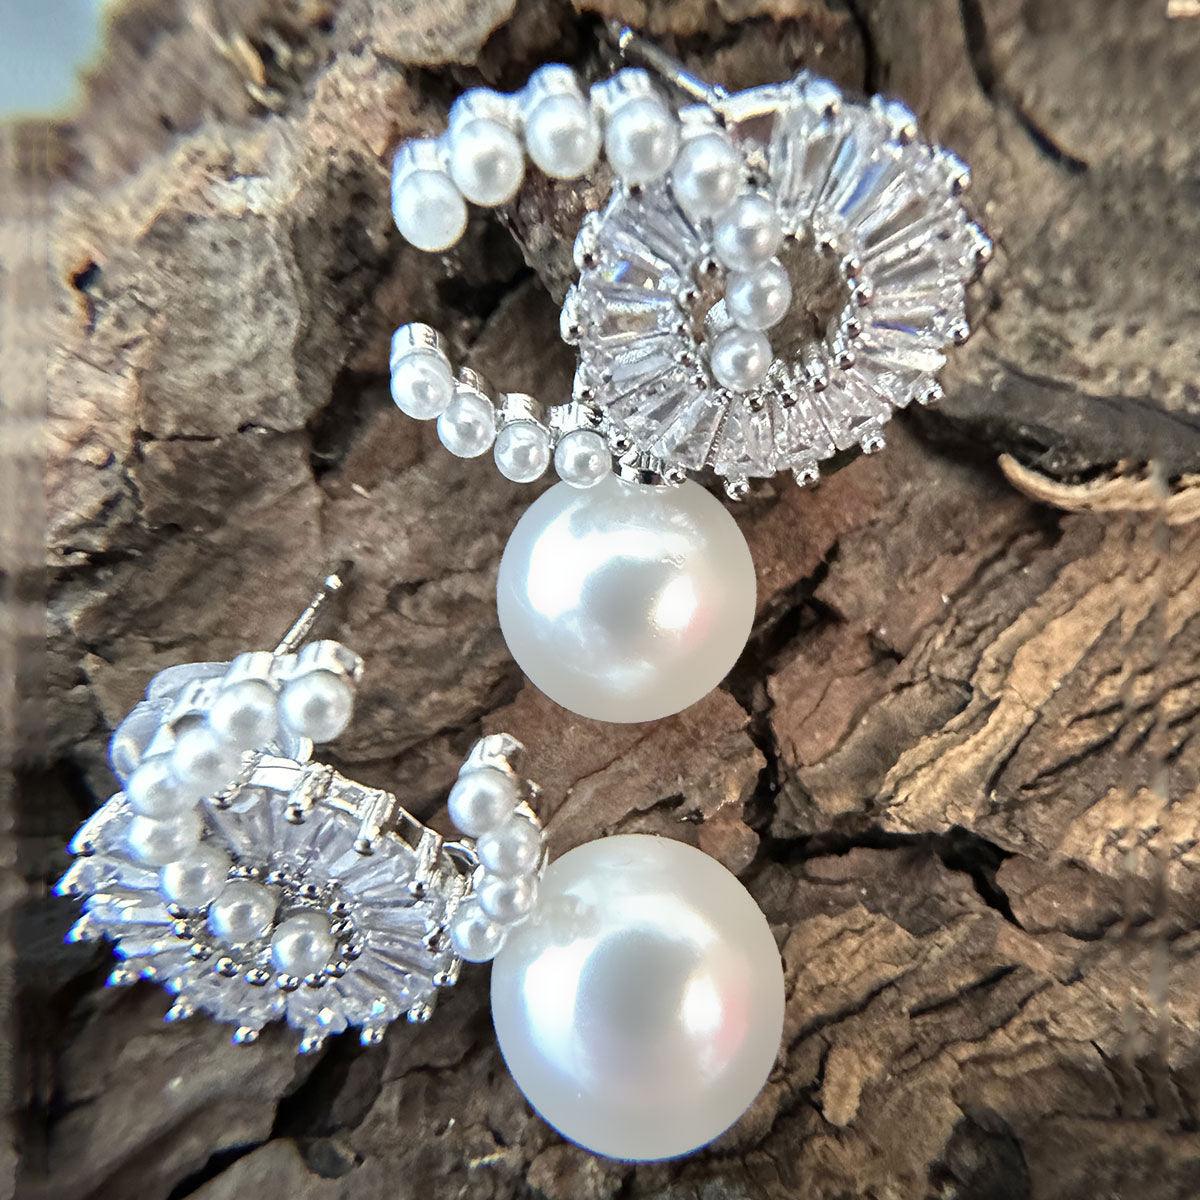 Fashion Jewelry: Gorgeous CZ Drop Pearl Earrings in White Gold Finish